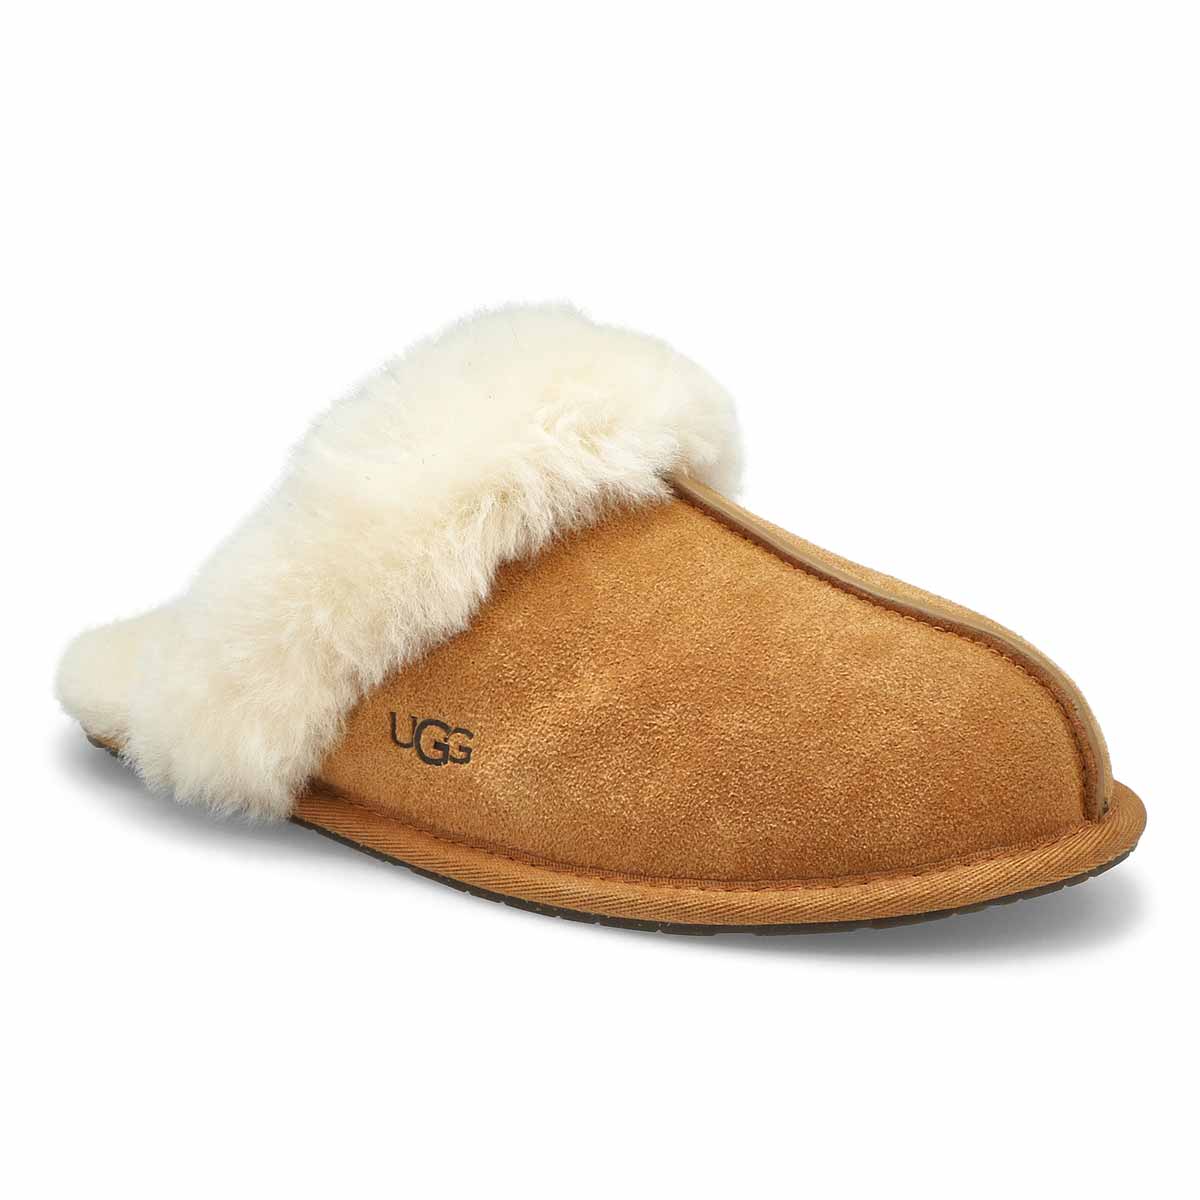 Get Cozy With Sereniti Springs' Fuzzy Slippers From Love Island